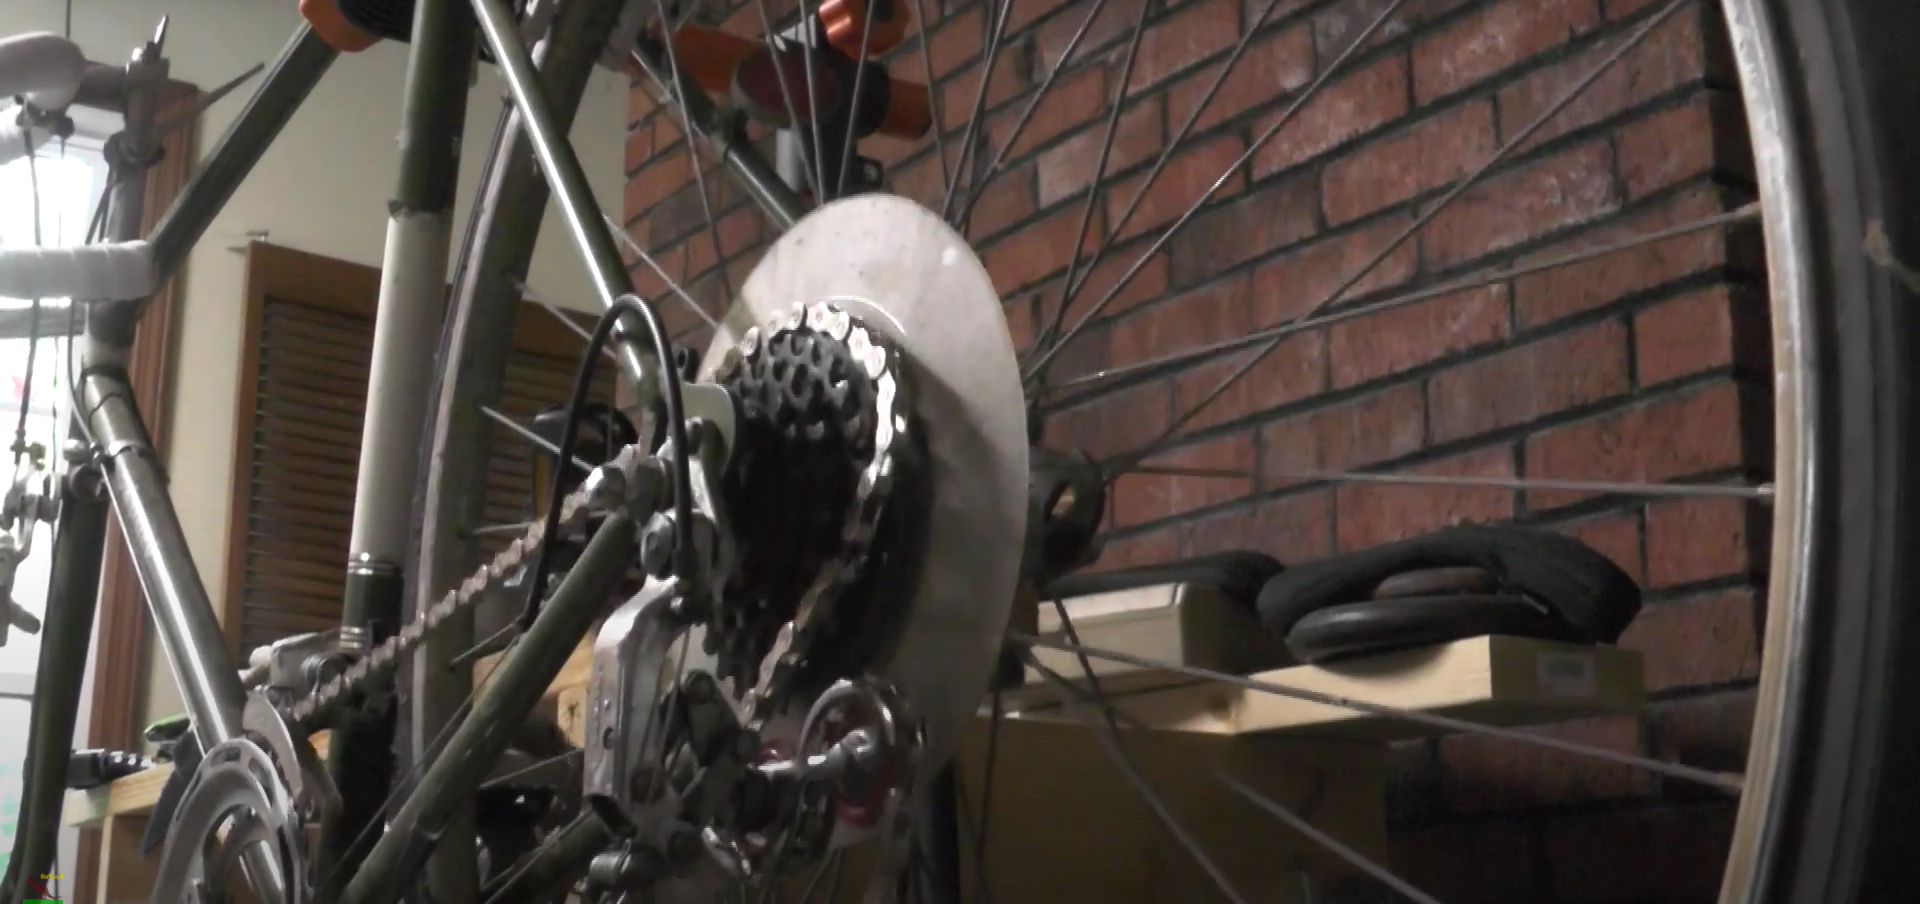 Bike Chain Removal Without Tool